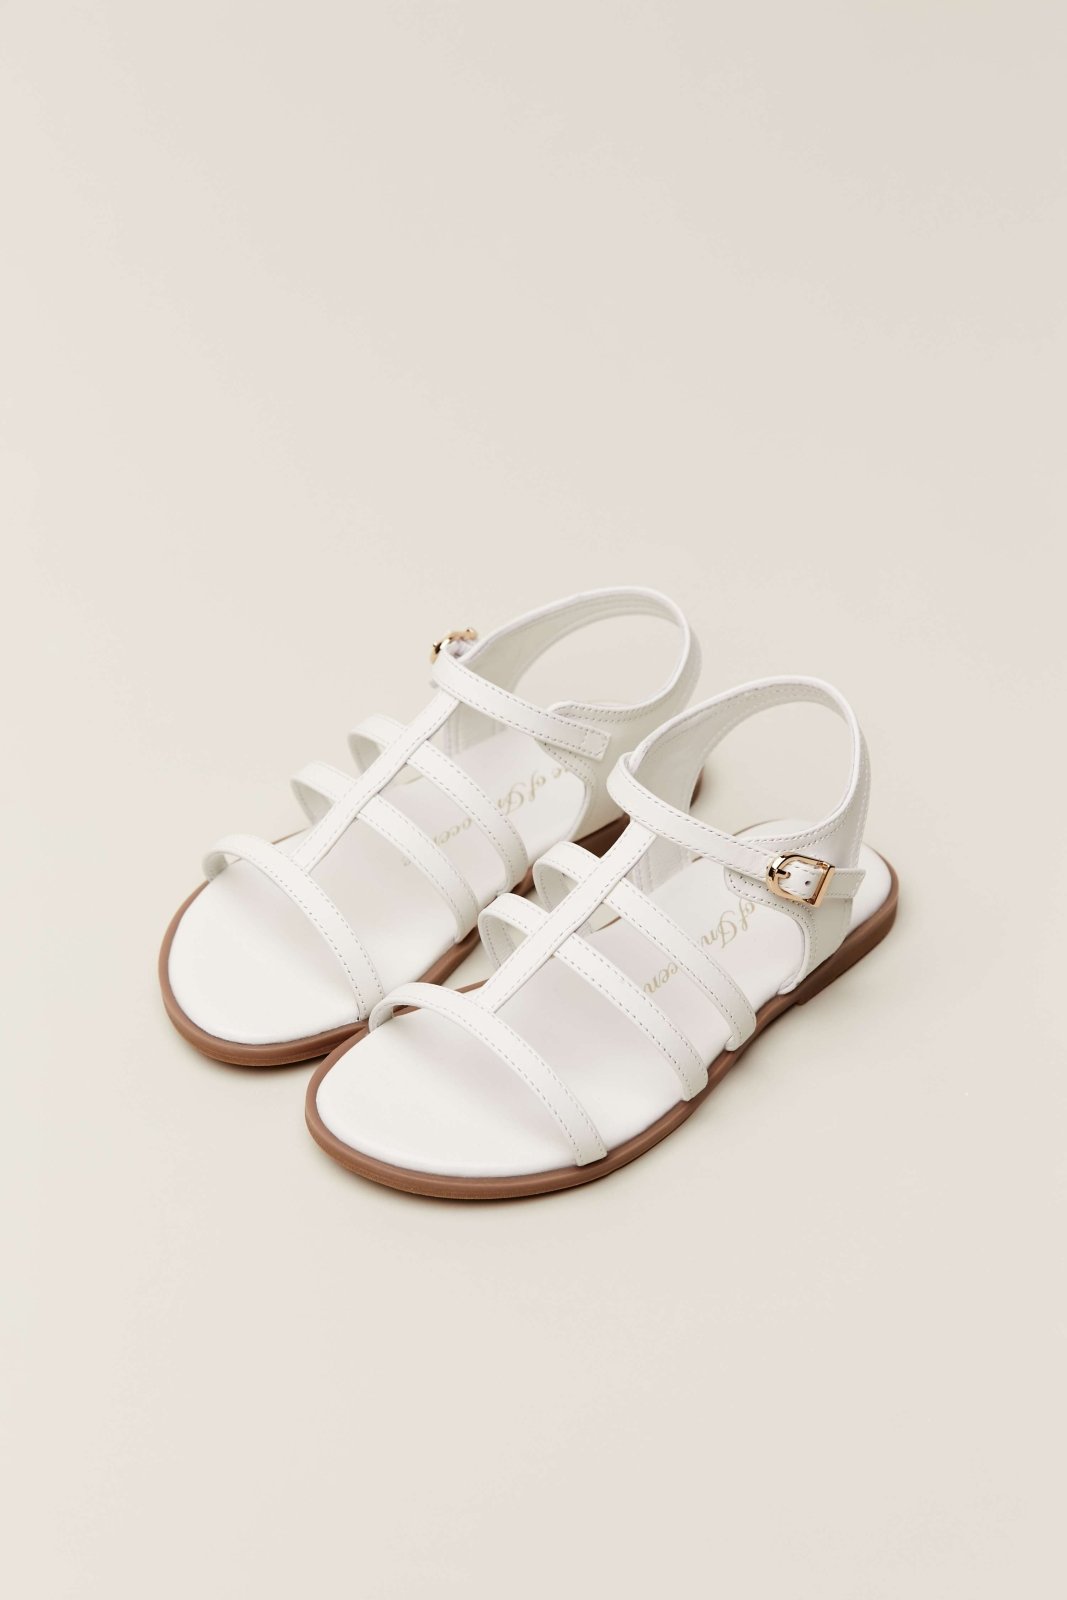 Effie White Sandals by Age of Innocence